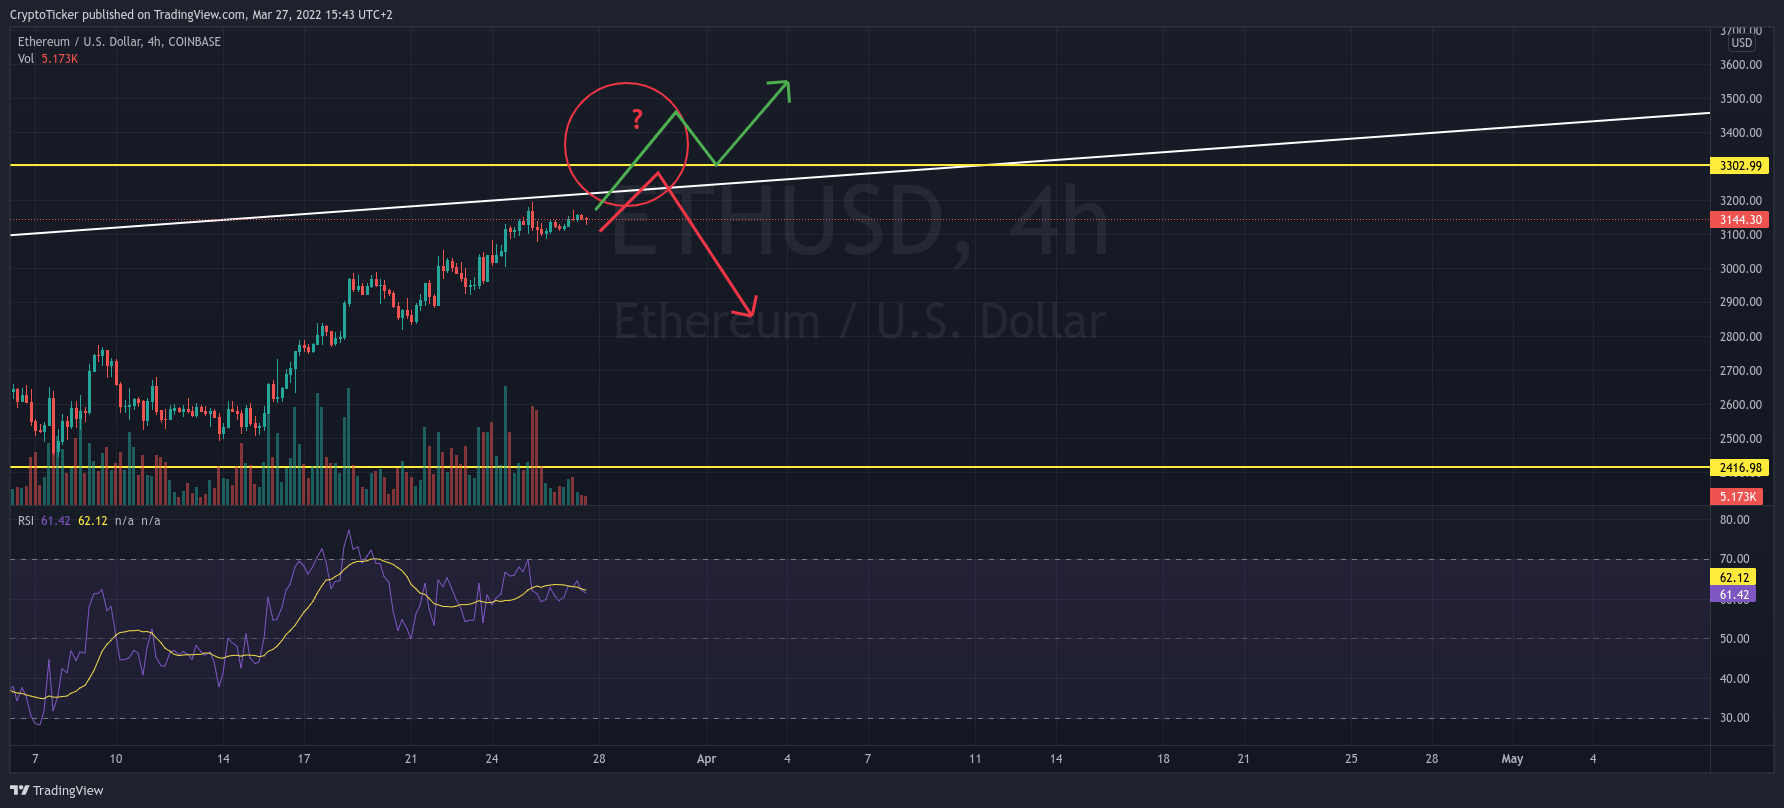 ETH/USD 4-hours chart showing 2 case scenarios for ETH prices